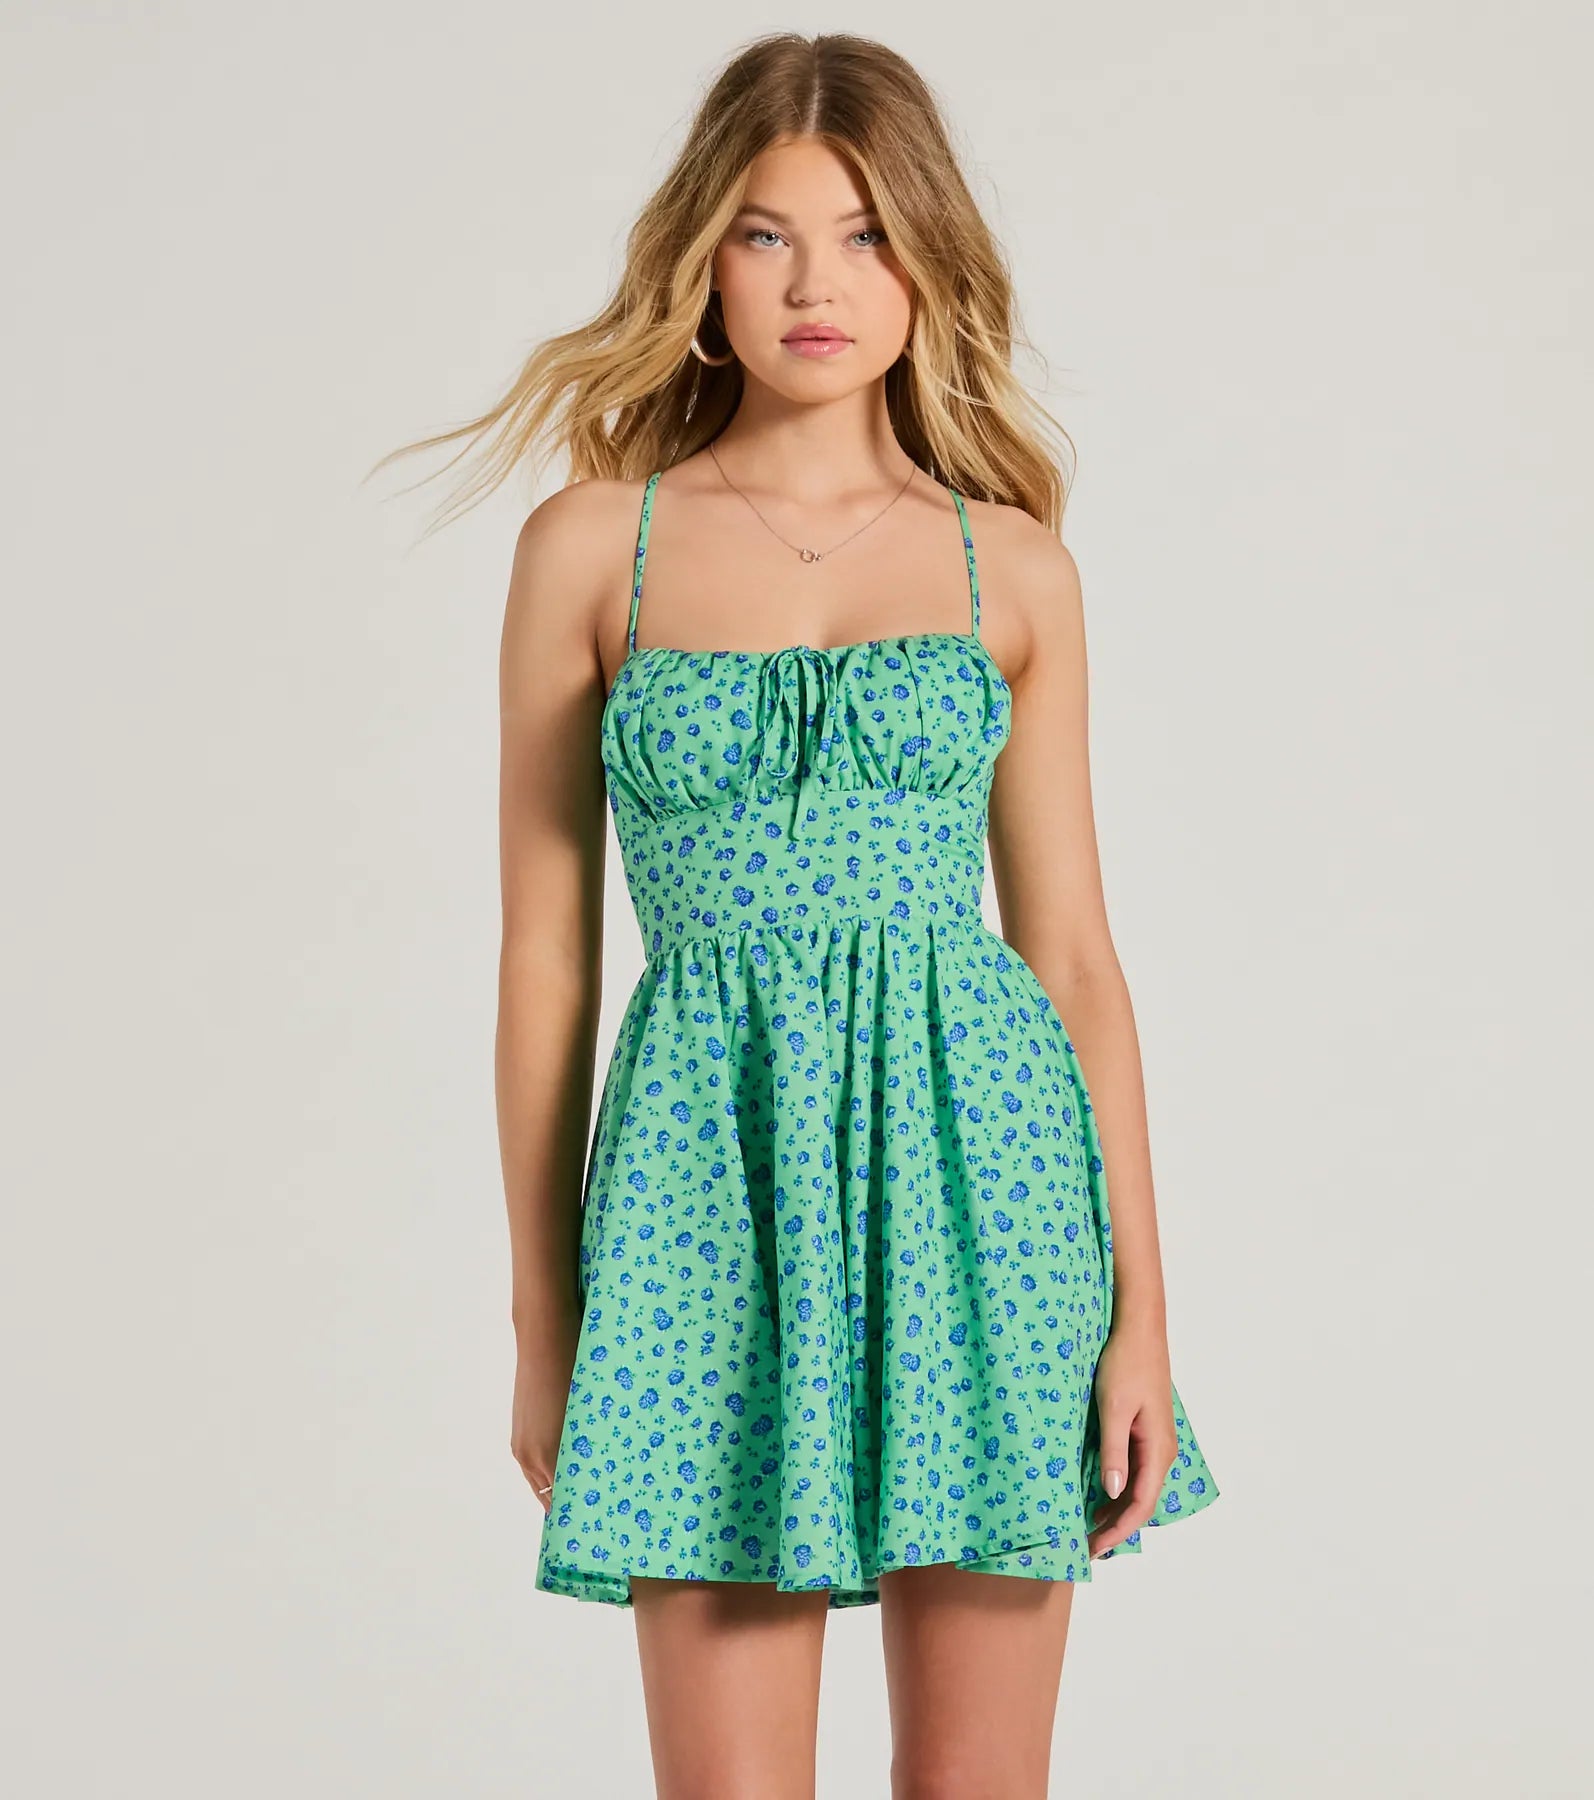 Spaghetti Strap Floral Print Square Neck Lace Lace-Up Skater Dress/Midi Dress With a Bow(s)